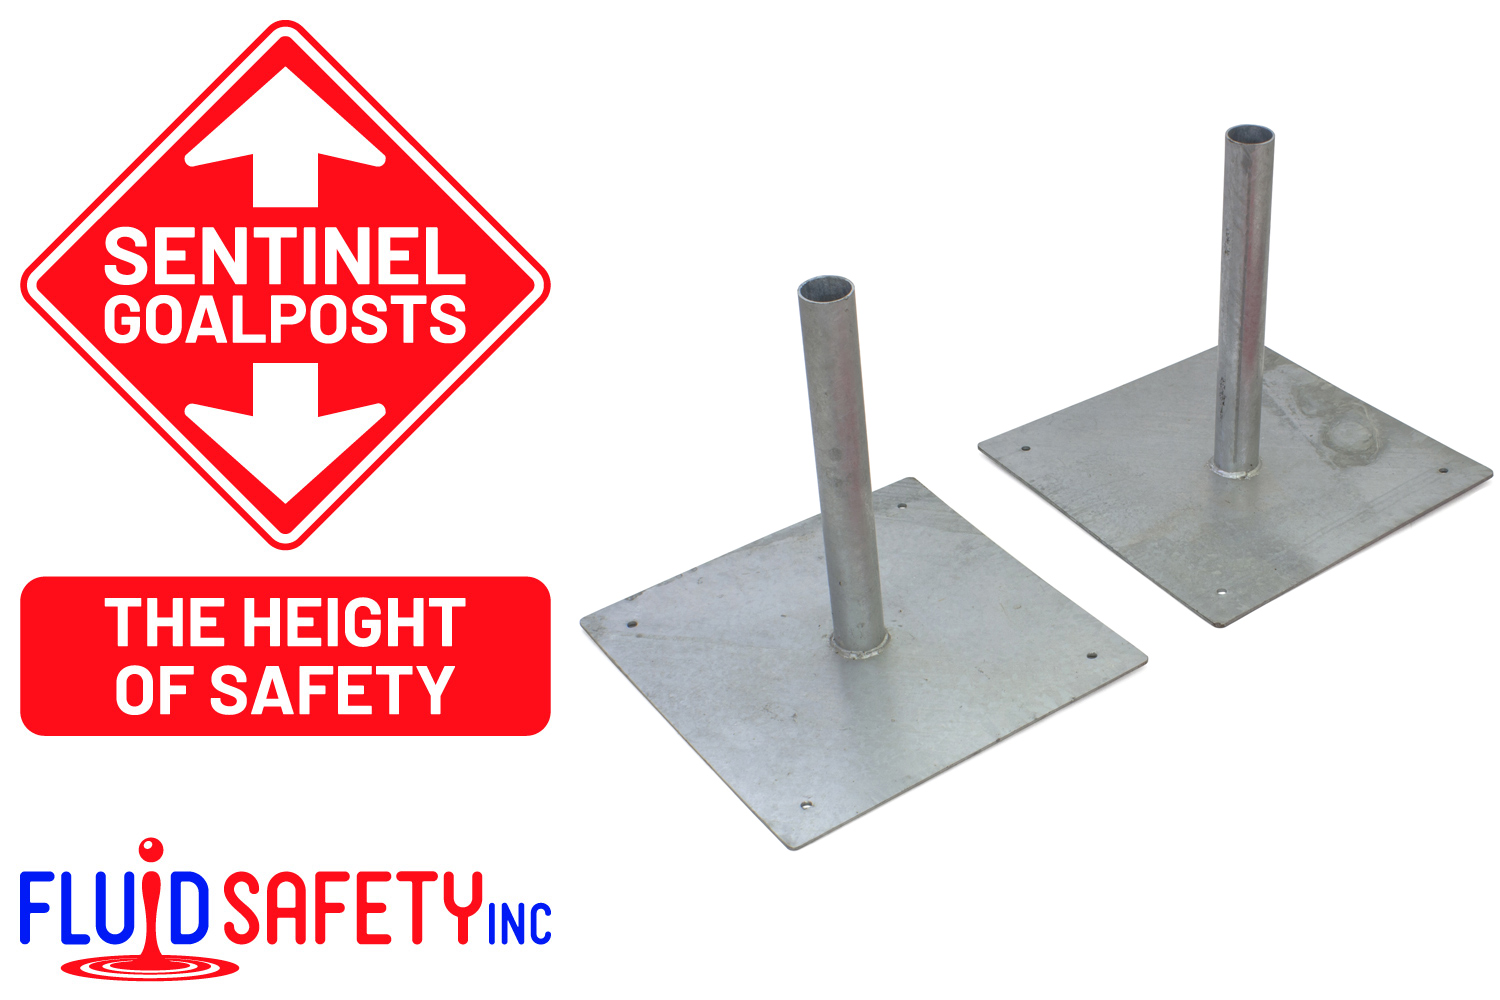 Red Telescopic Poles and Bunting for Height Restrction Barriers